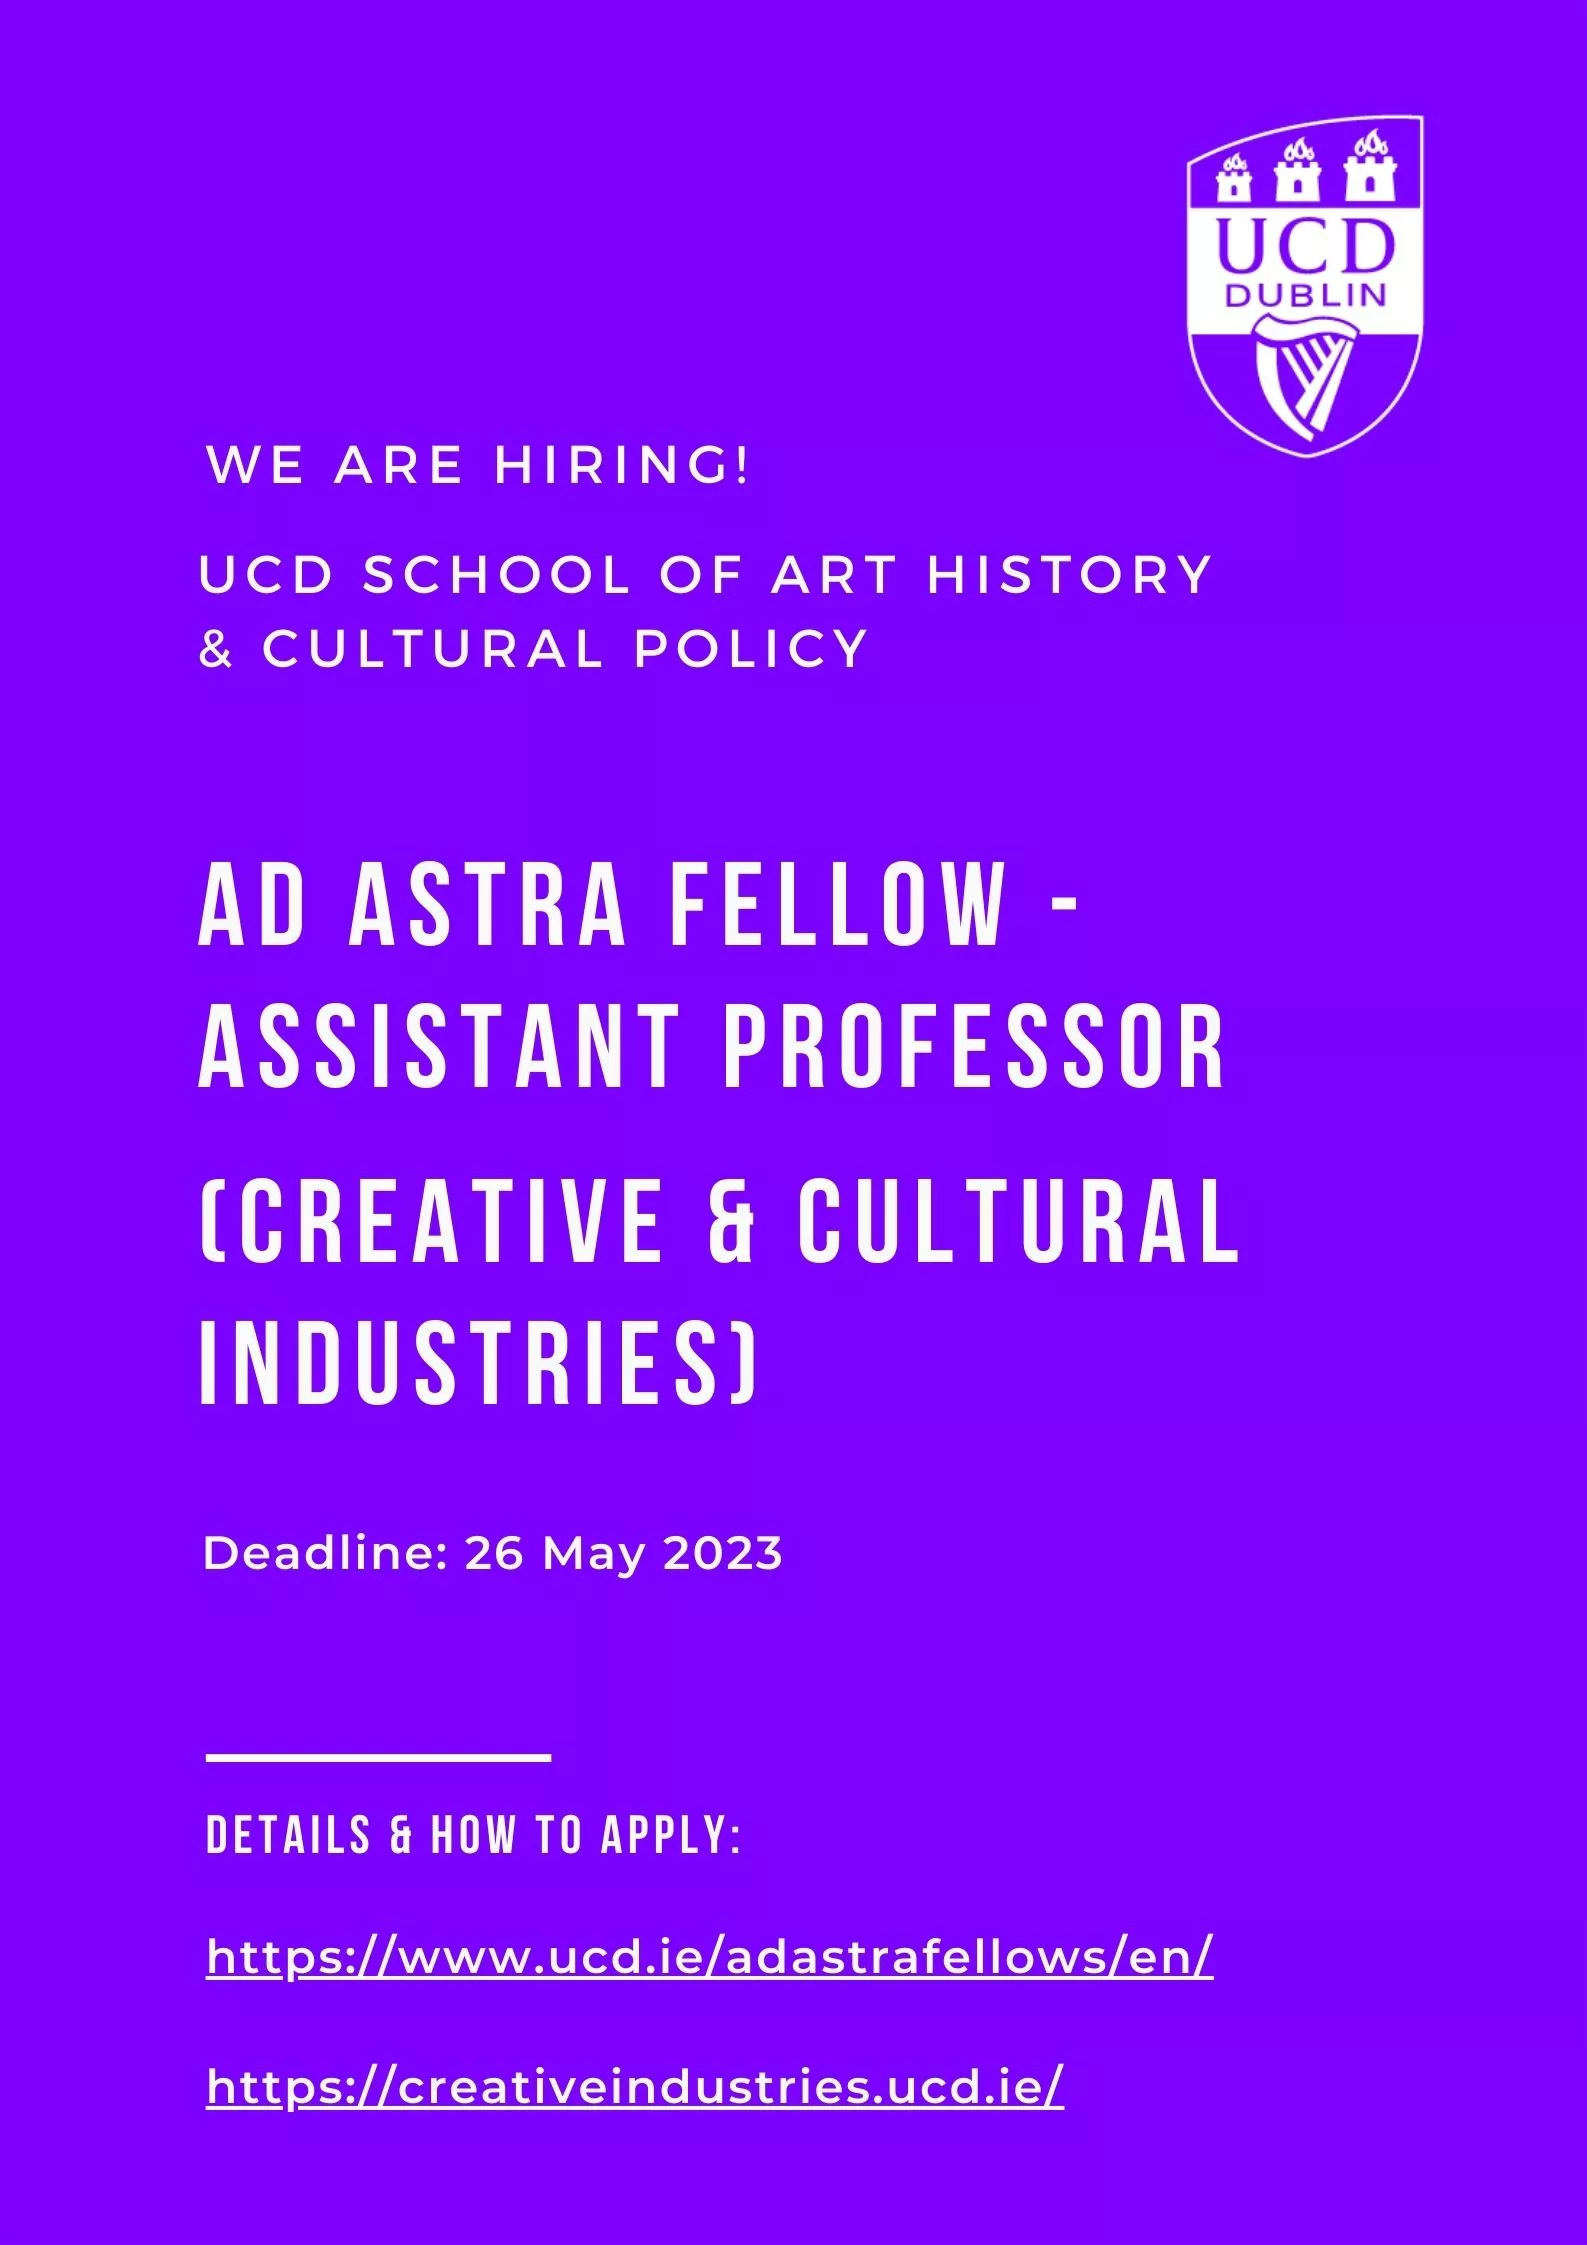 Job opening: Creative & Cultural Industries at UCD